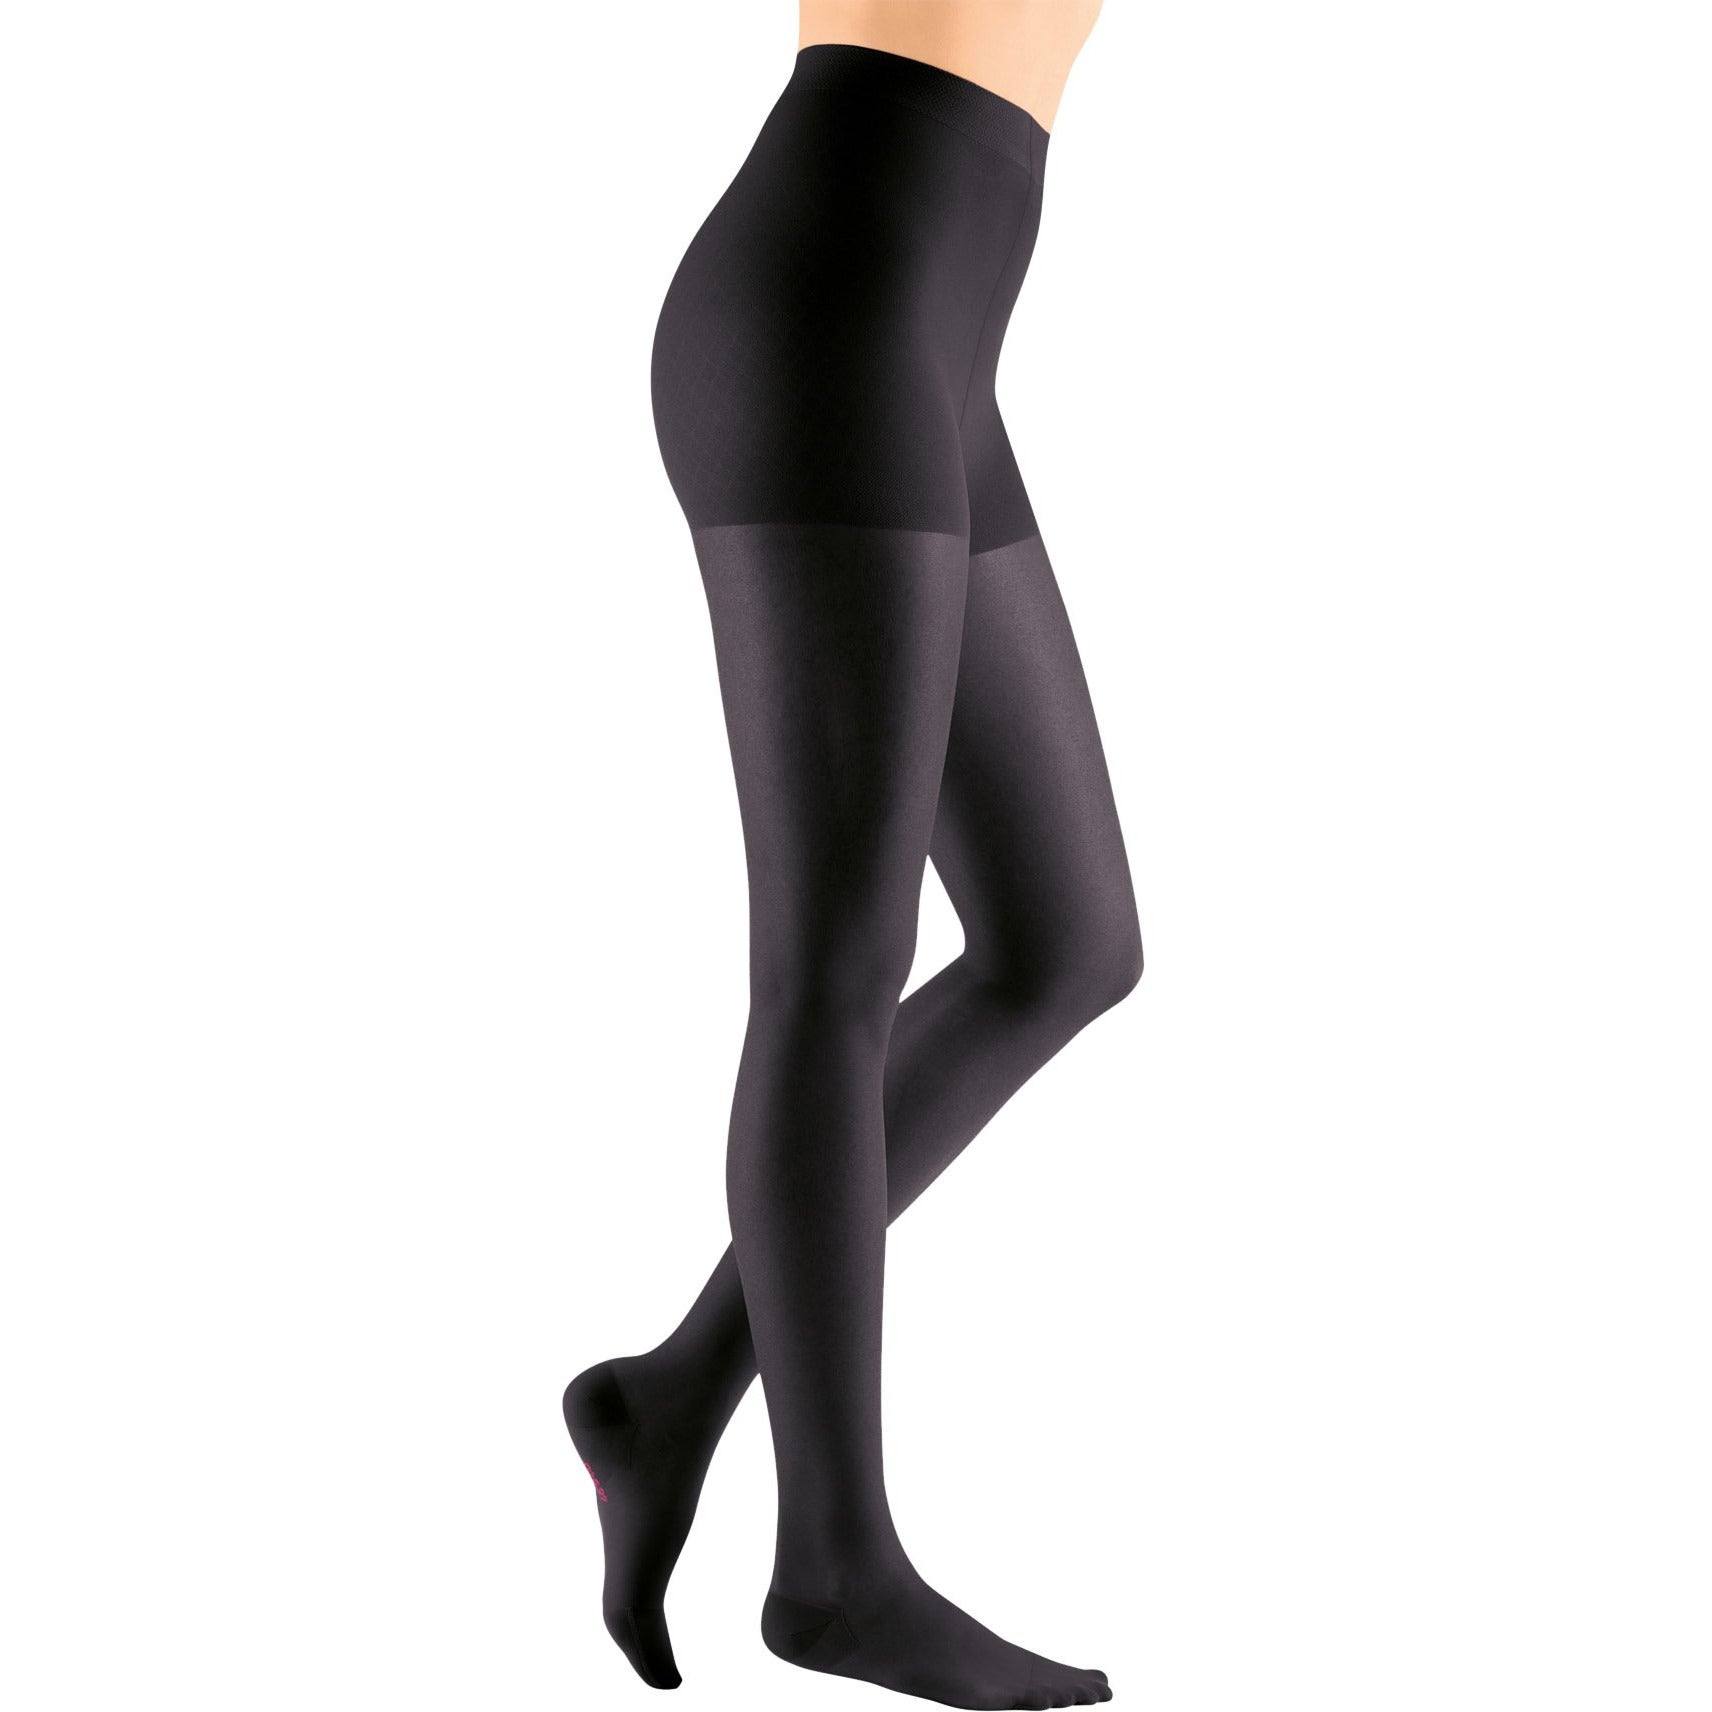 Compression Hosiery Medical Compression Stockings And Tights For